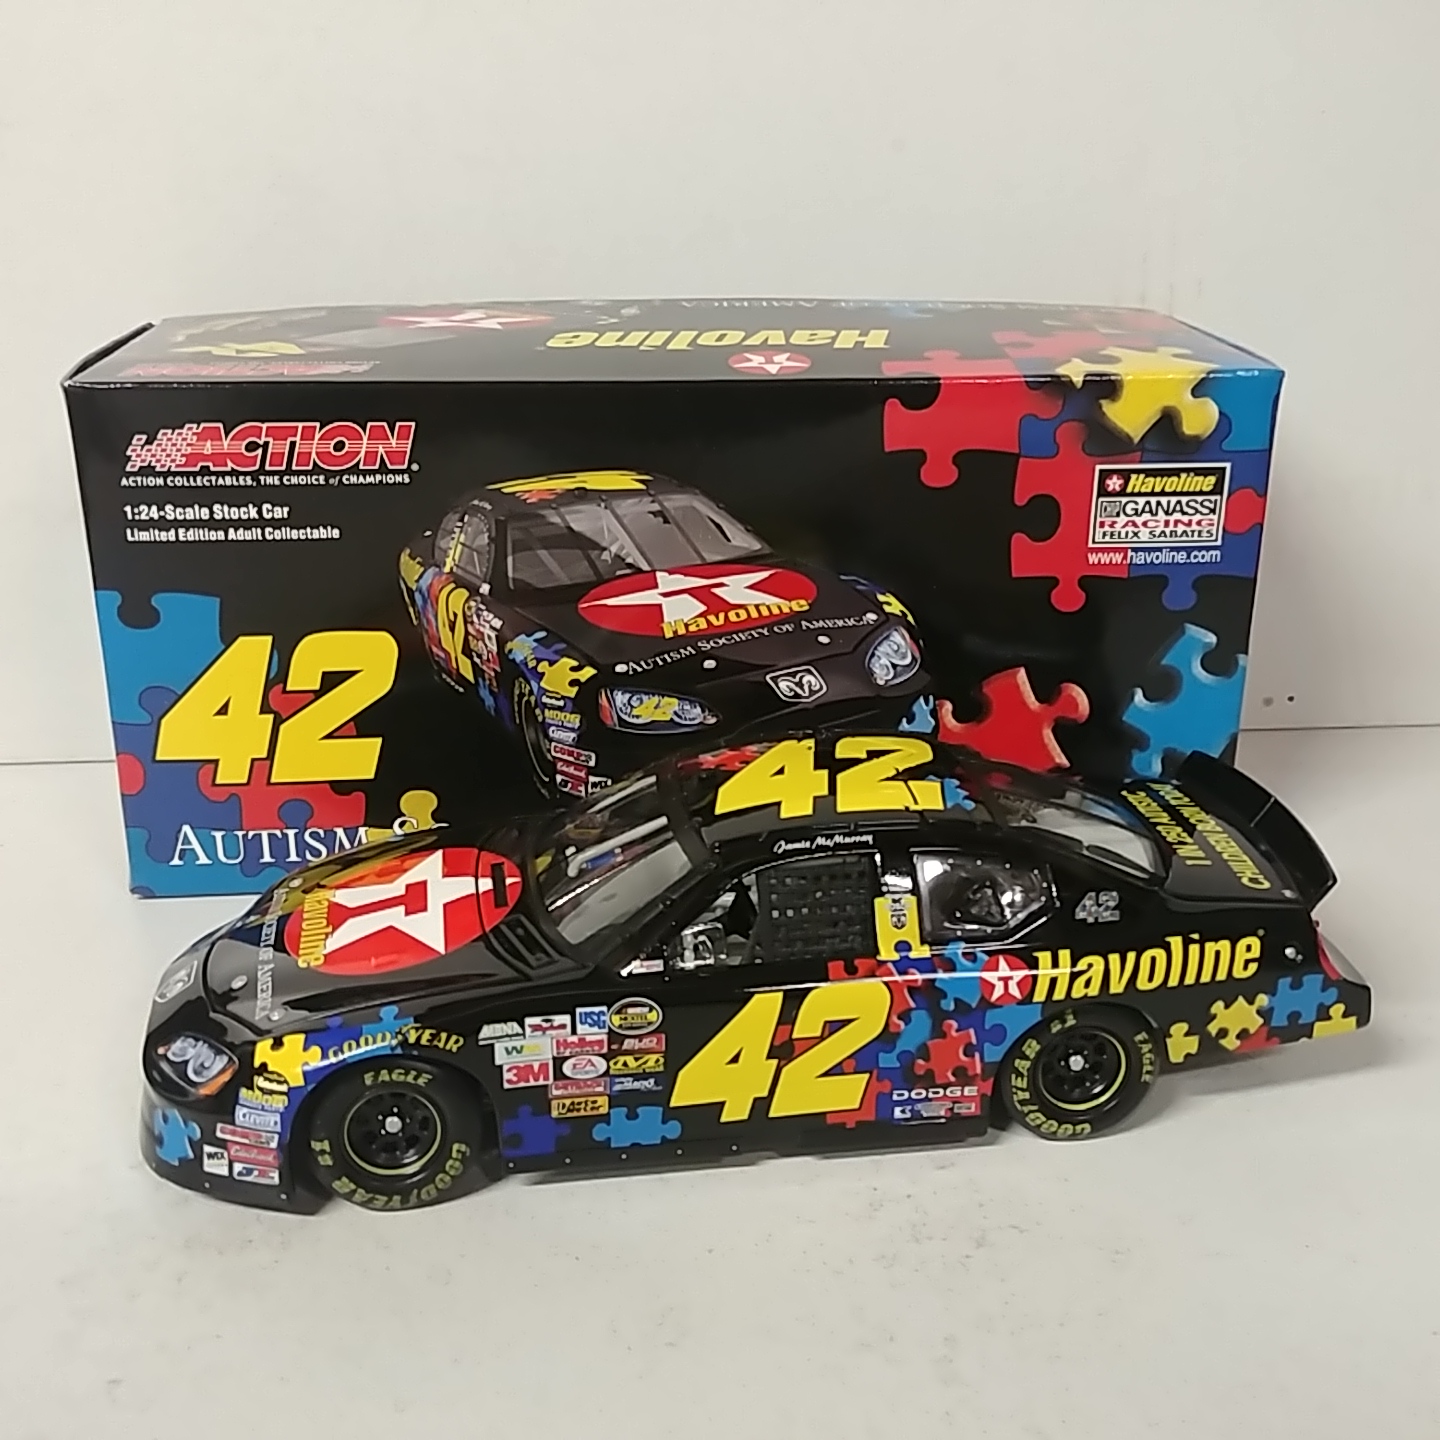 2005 Jamie McMurray 1/24th Havoline "Autism Society of America" Charger